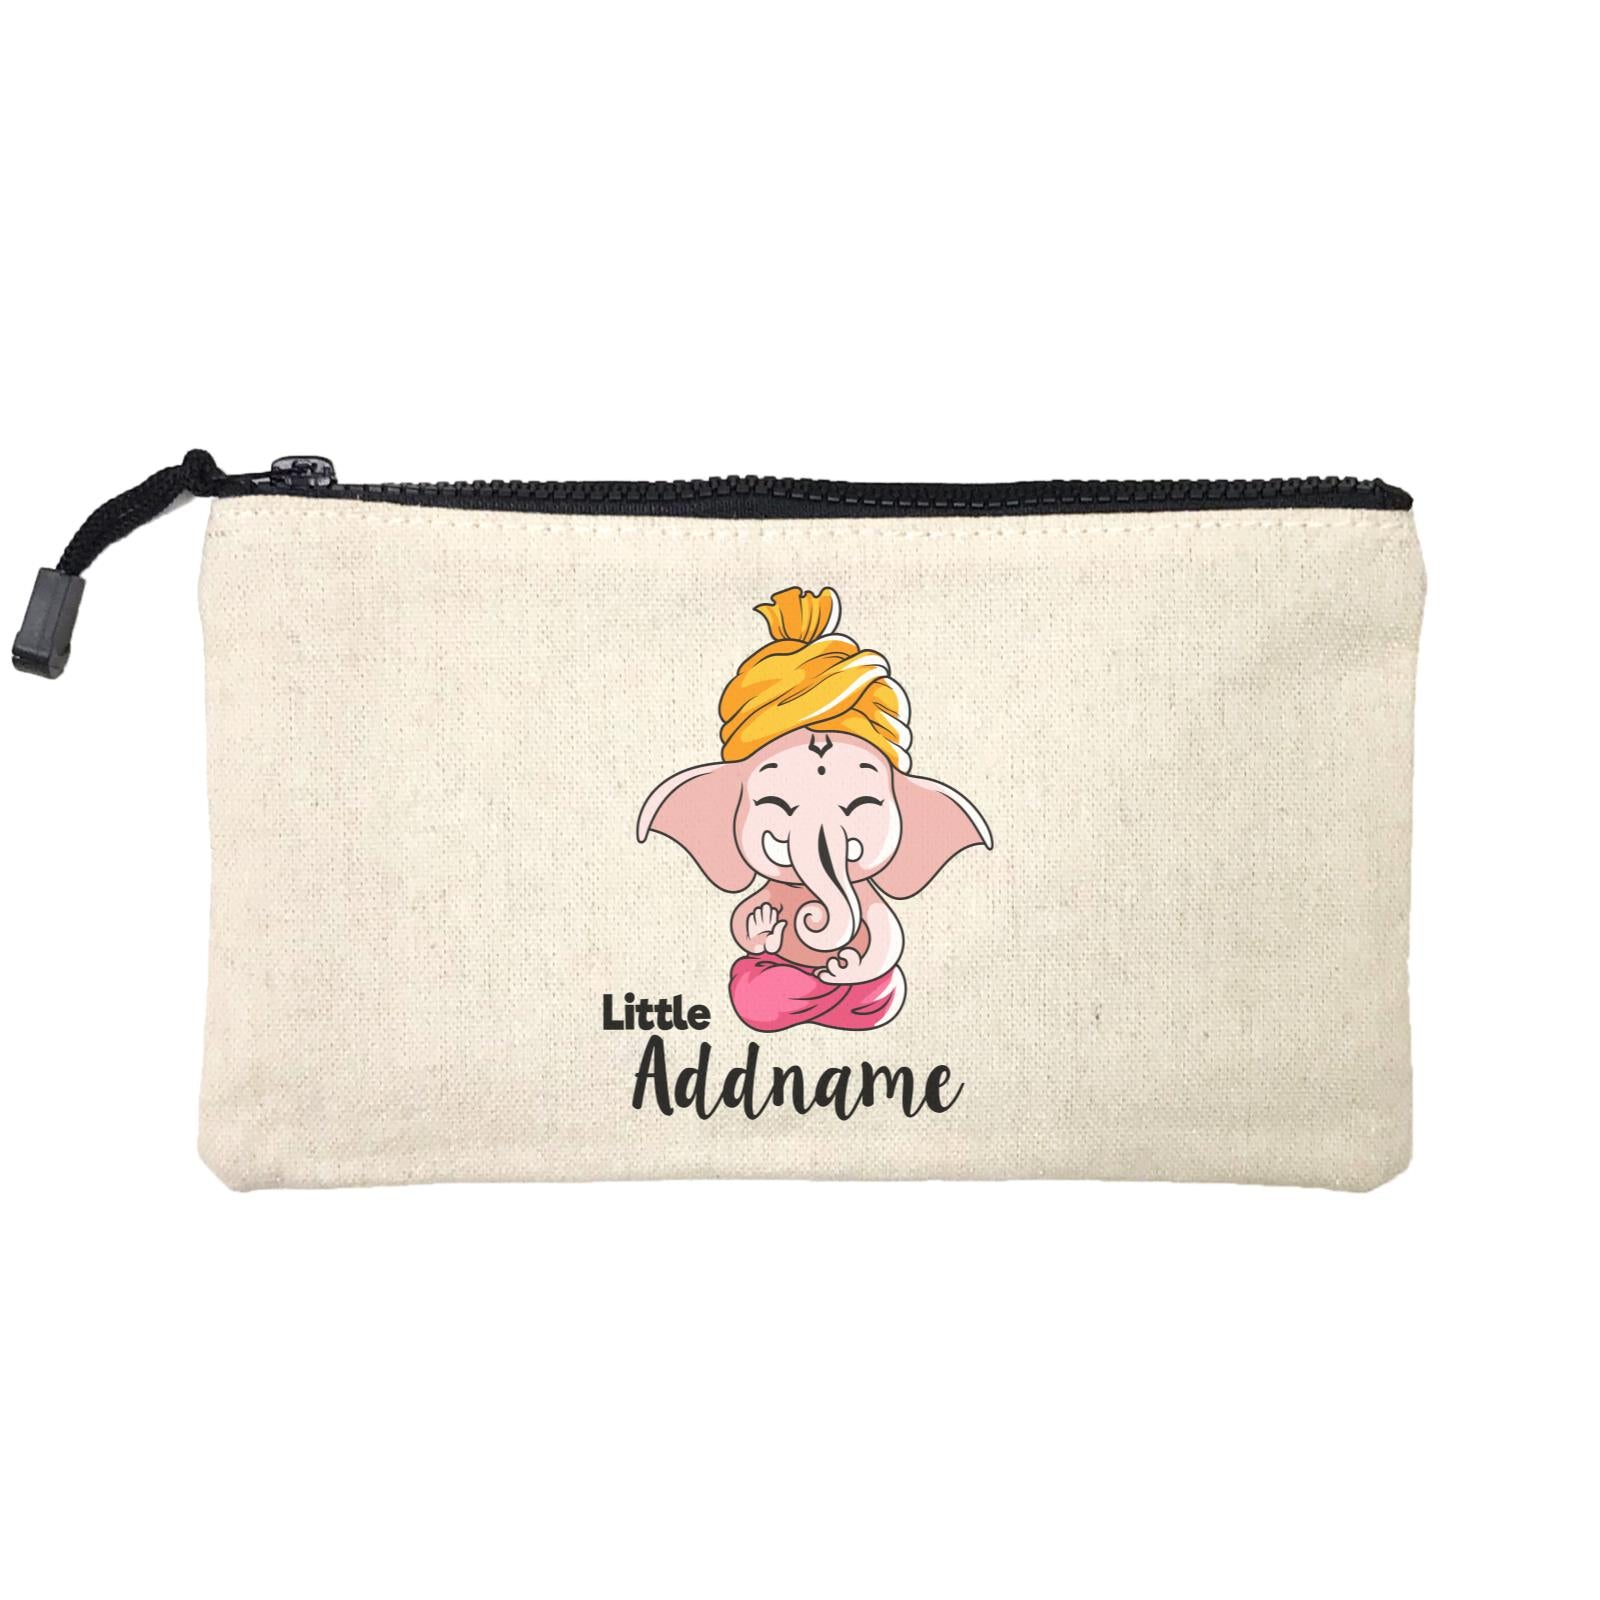 Cute Sitting Ganesha Meditating Little Addname Mini Accessories Stationery Pouch